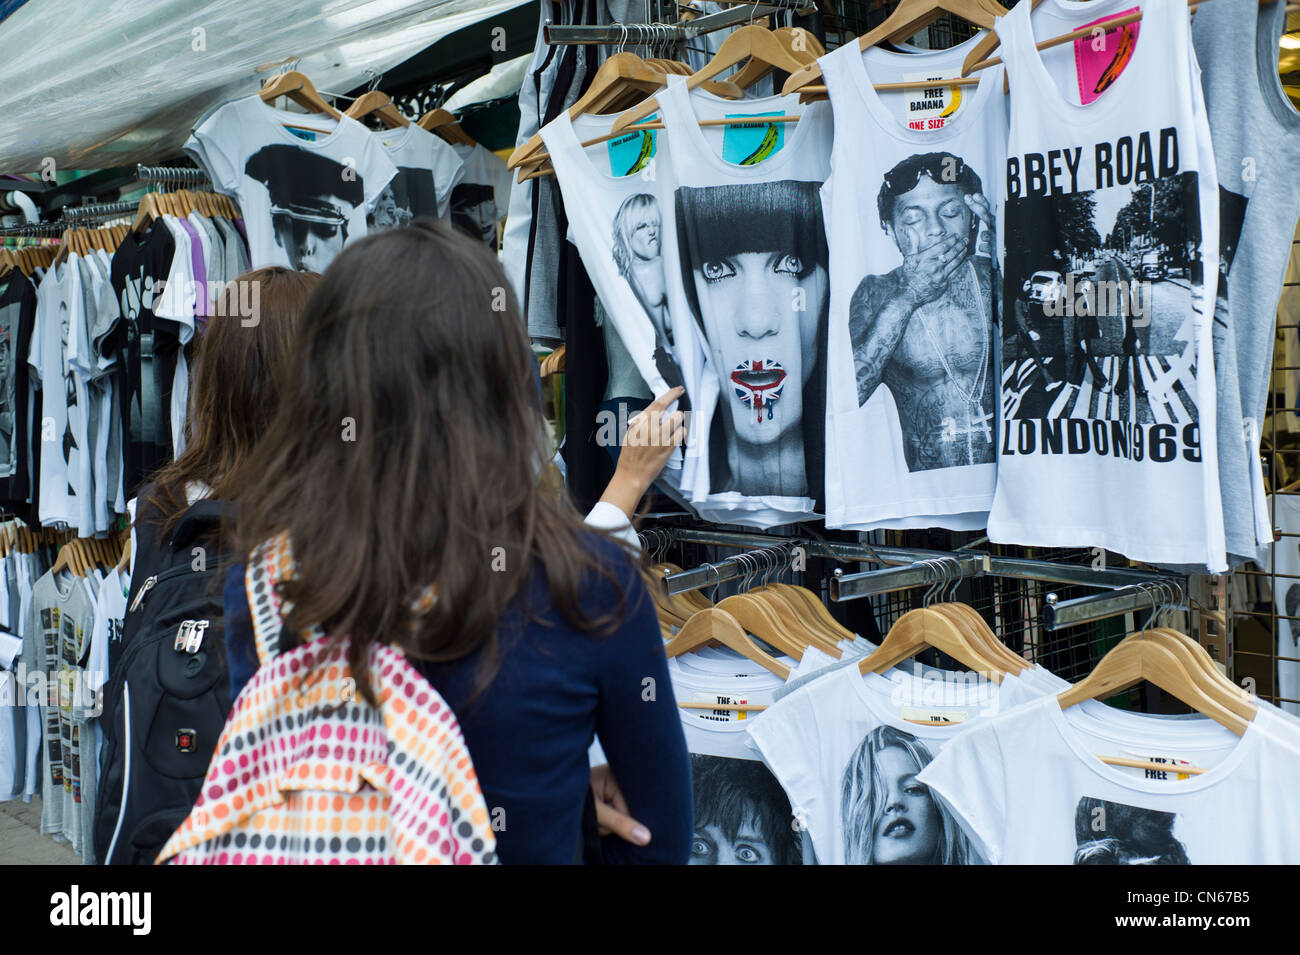 People, Shoppers buying, looking at t-shirts, vest on stall in Camden Market, Camden Town, London, England Stock Photo